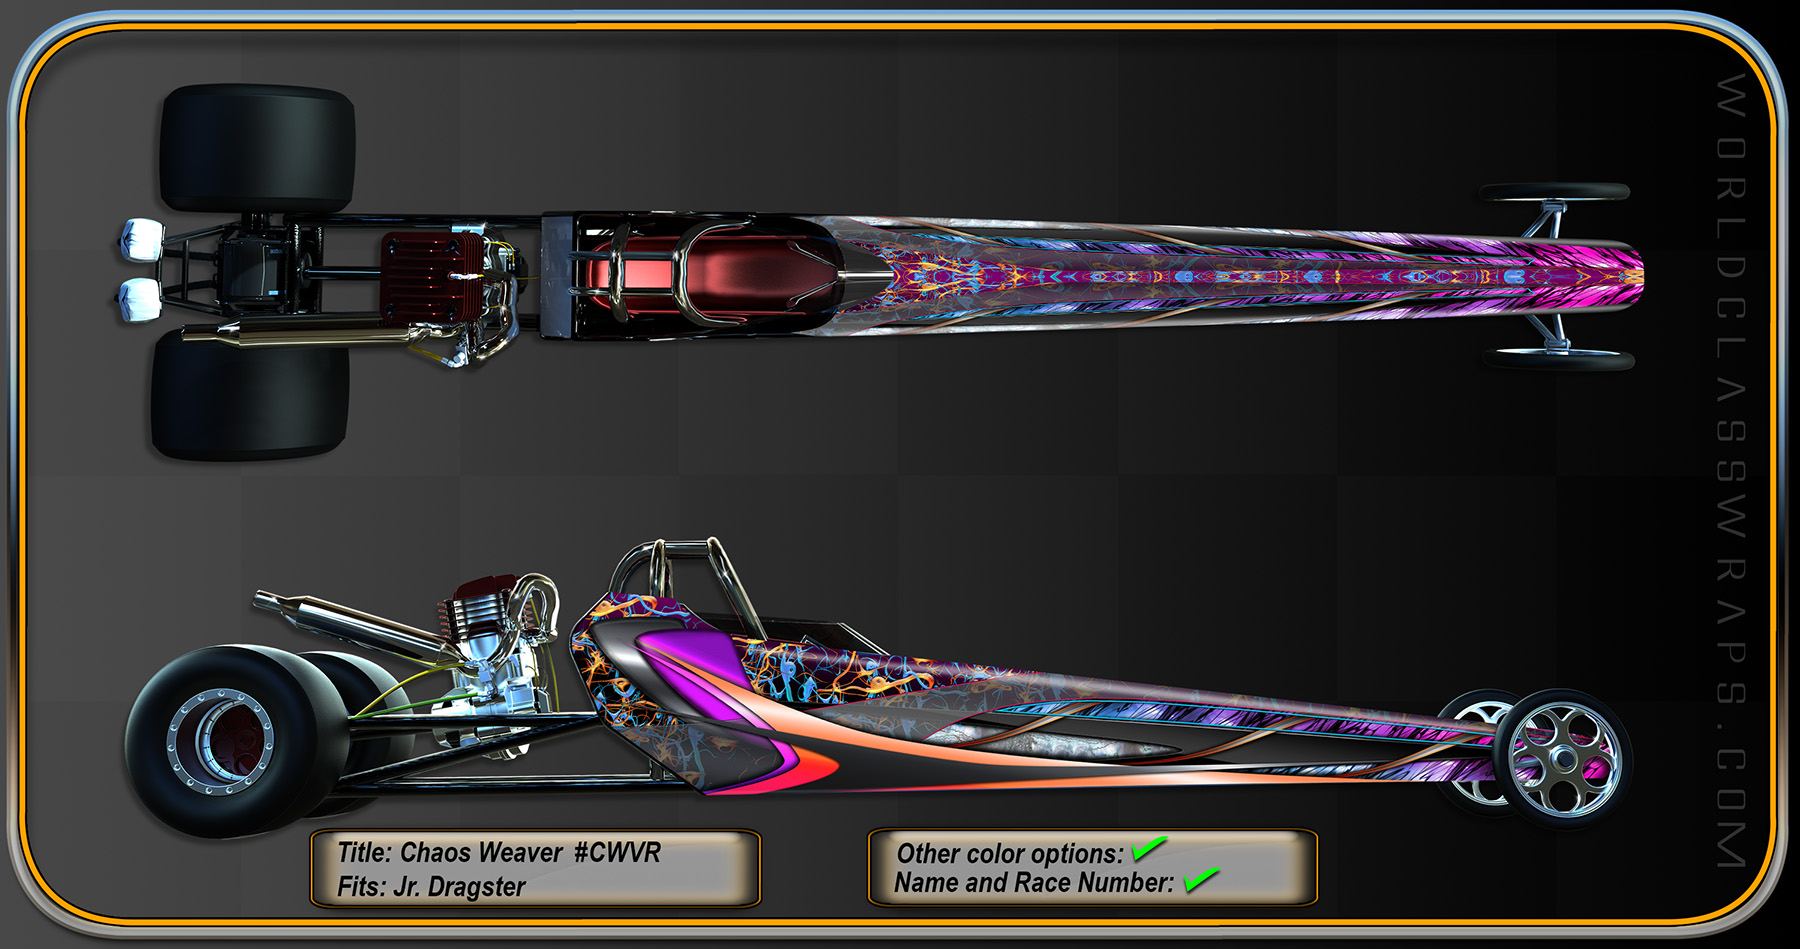 Chaos Weaver dragster graphics